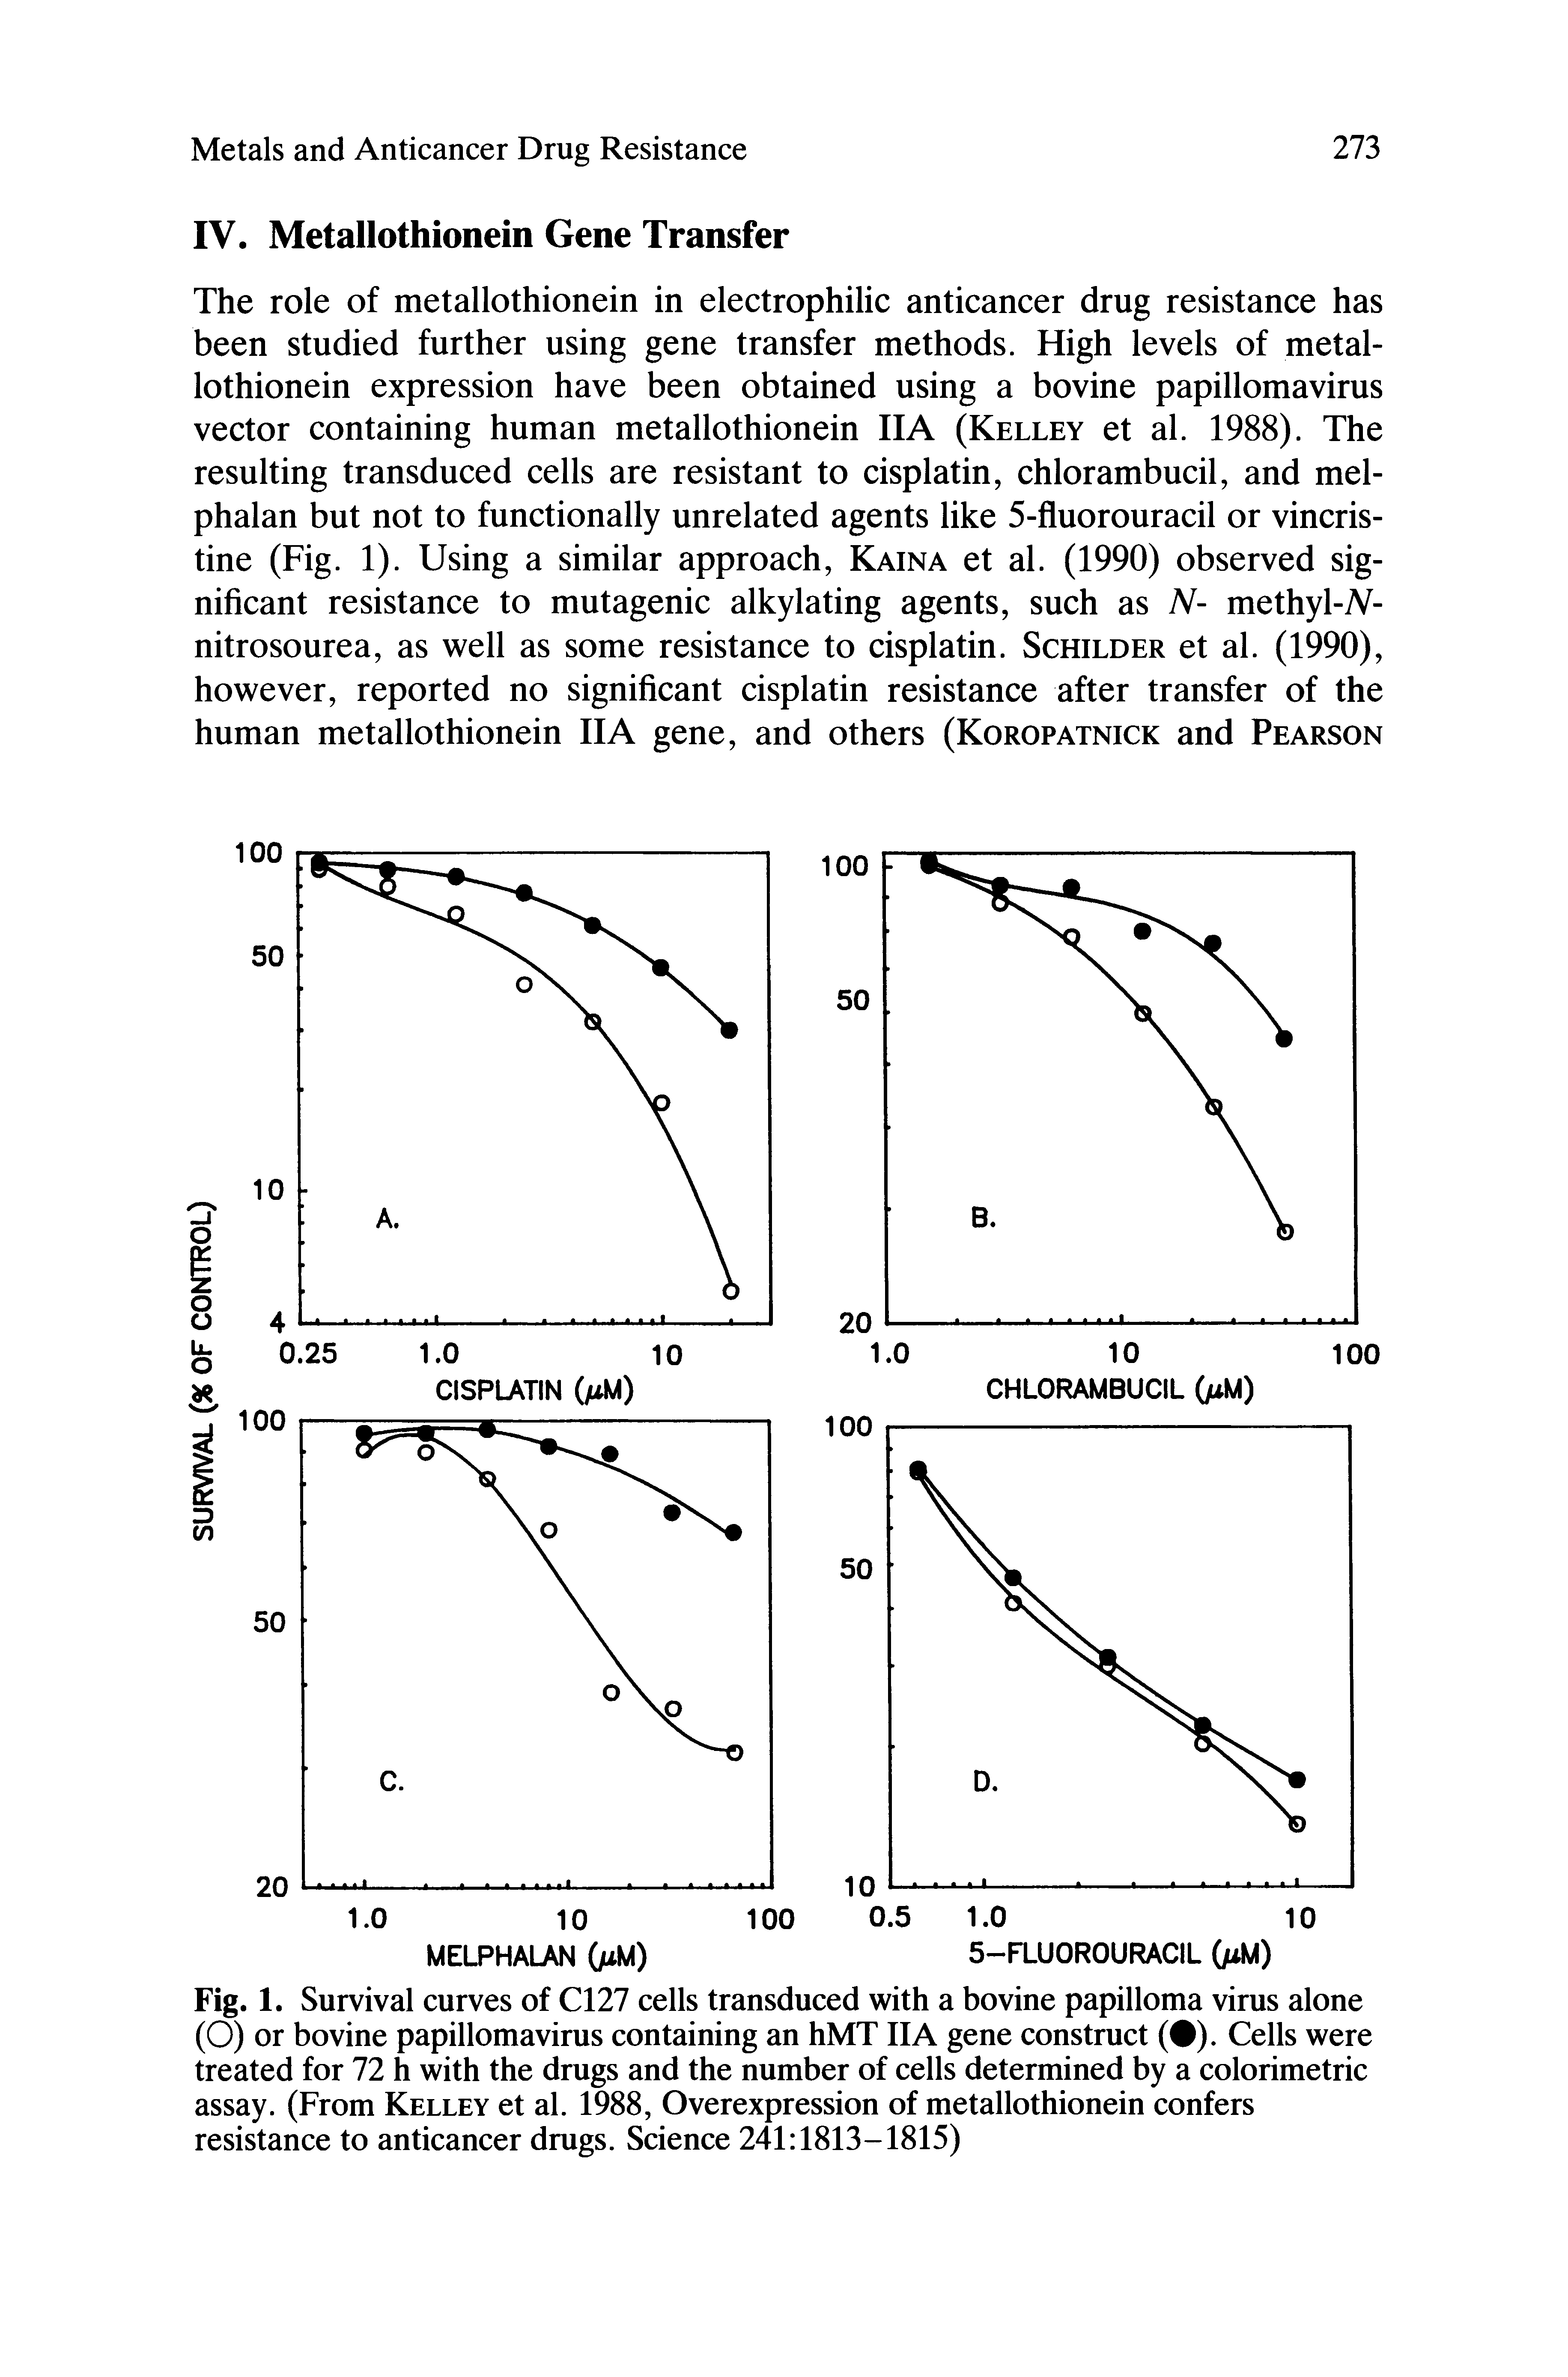 Fig. 1. Survival curves of C127 cells transduced with a bovine papilloma virus alone (O) or bovine papillomavirus containing an hMT IIA gene construct ( ). Cells were treated for 72 h with the drugs and the number of cells determined by a colorimetric assay. (From Kelley et al. 1988, Overexpression of metallothionein confers resistance to anticancer drugs. Science 241 1813-1815)...